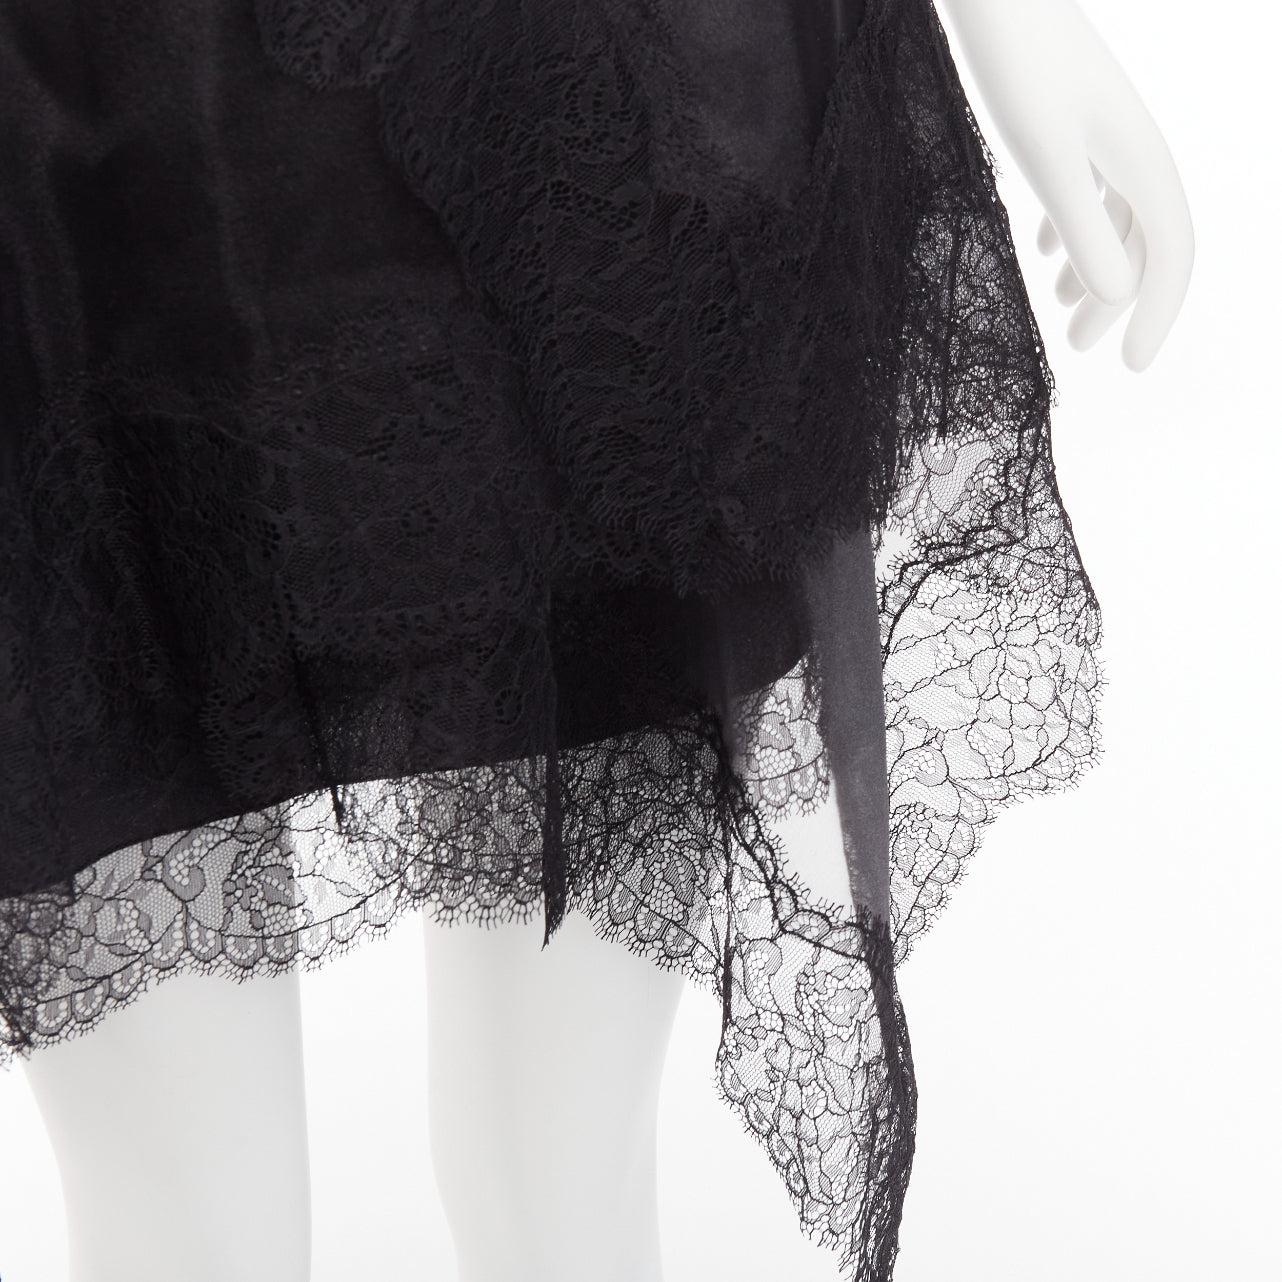 ERMANNO SCERVINO 2018 black lace overlay cascade asymmetric mini skirt IT40 S
Reference: AAWC/A00843
Brand: Ermanno Scervino
Collection: 2018
Material: Polyester
Color: Black
Pattern: Lace
Closure: Snap Buttons
Lining: Black Fabric
Extra Details: